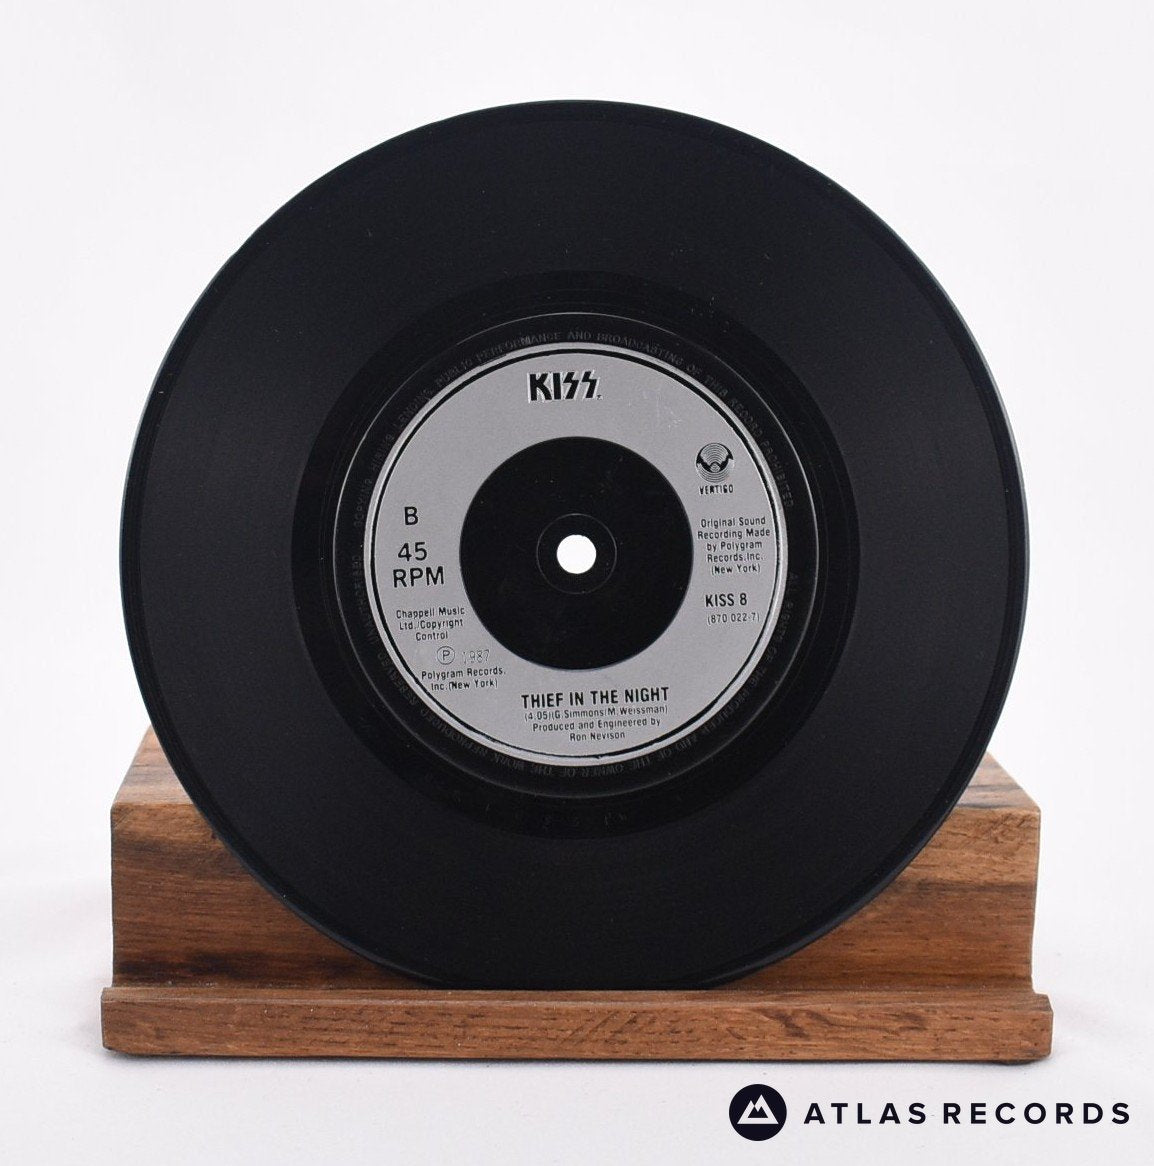 What Is Vinyl? This Is What Records Are Made Of – Vinyl Record Life